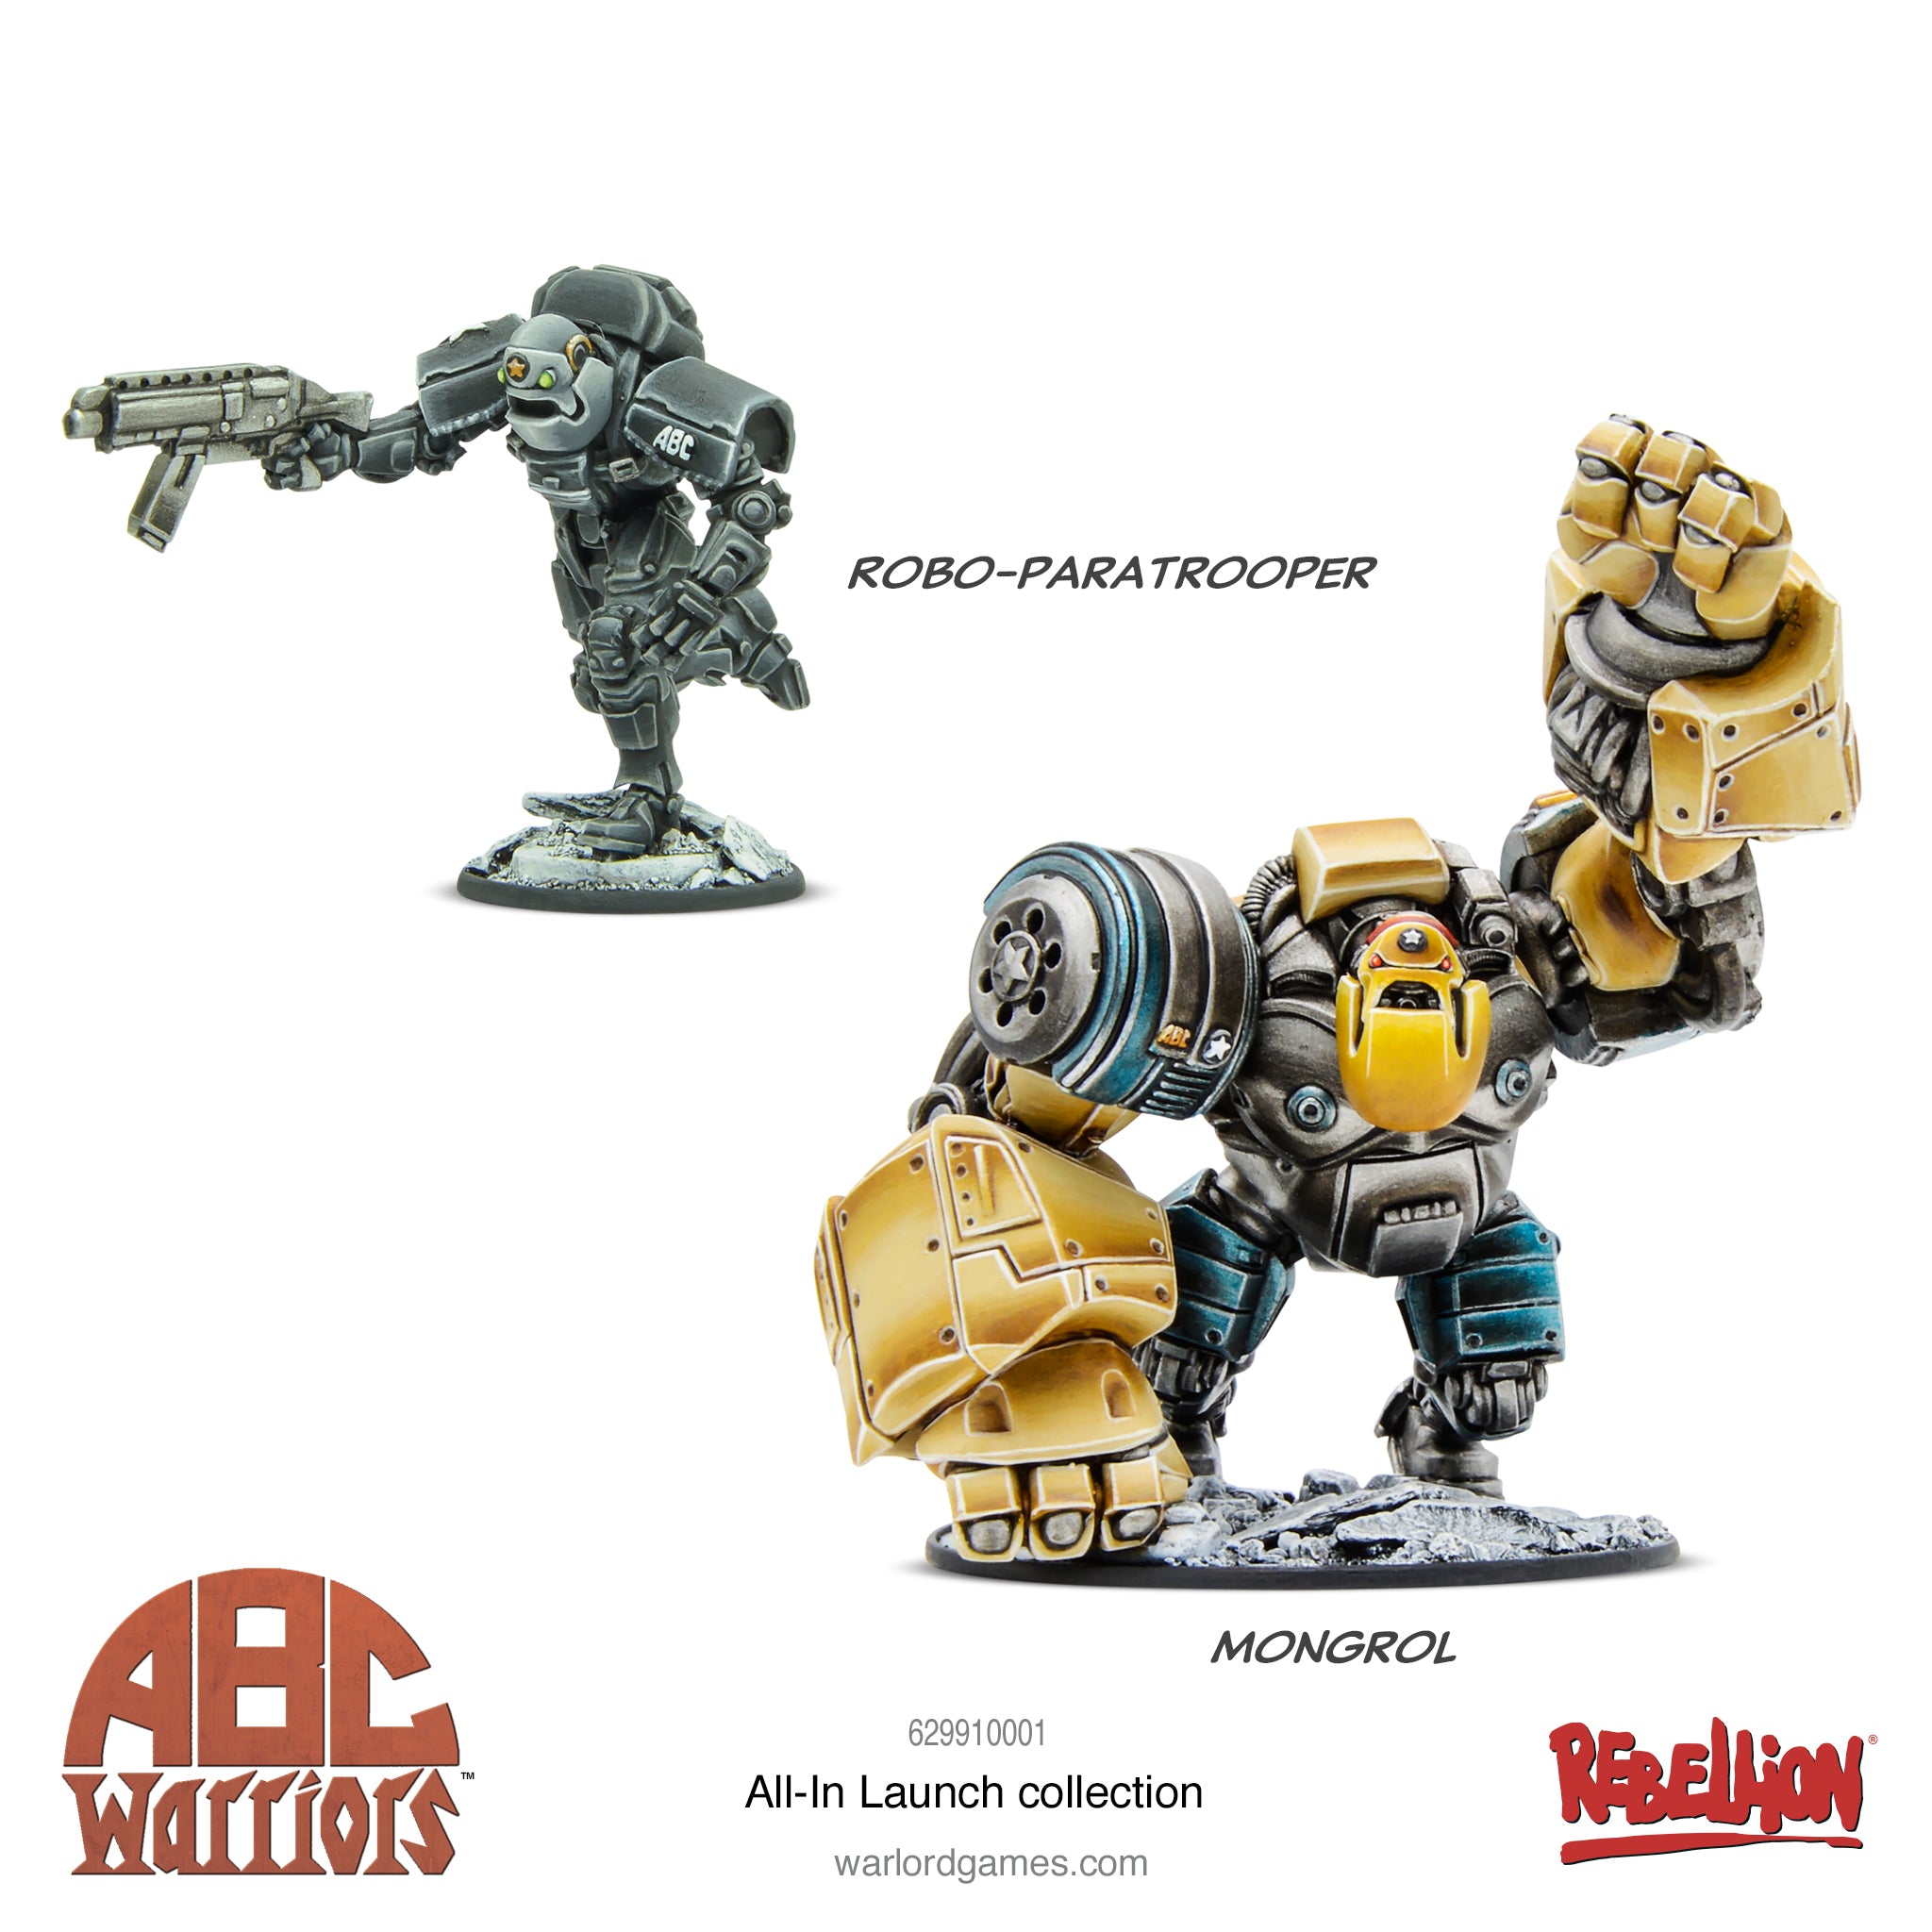 ABC Warriors: All In Launch Collection